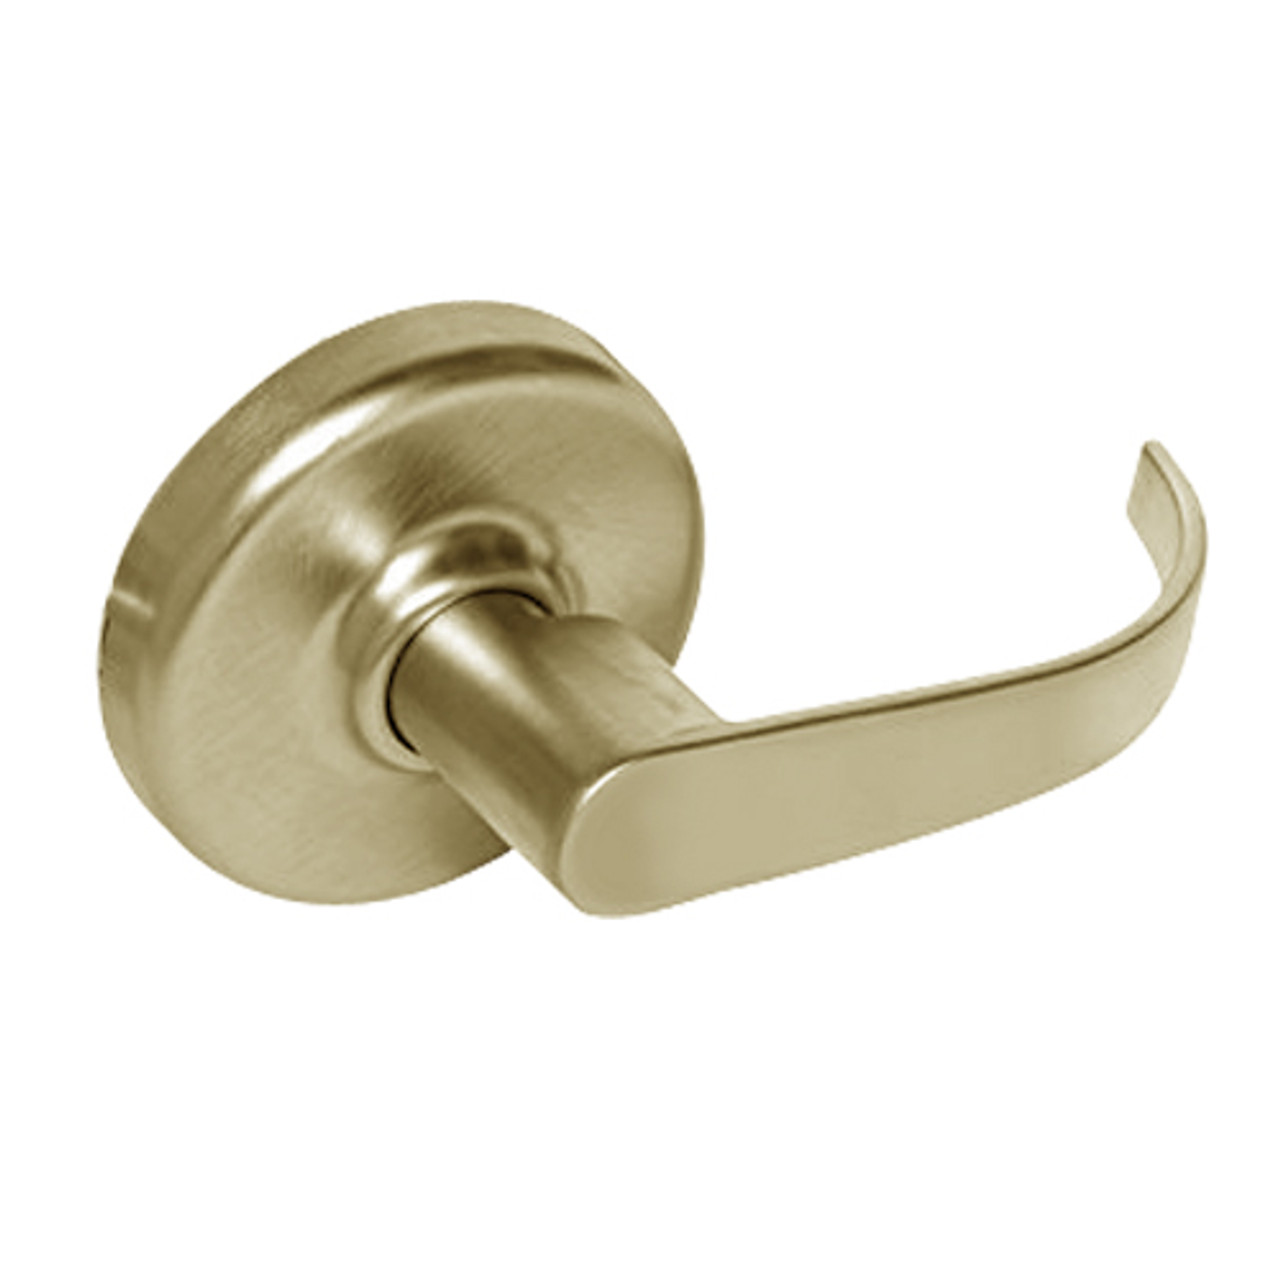 CL3390-PZD-606 Corbin CL3300 Series Extra Heavy Duty Passage with Turnpiece Cylindrical Locksets with Princeton Lever in Satin Brass Finish